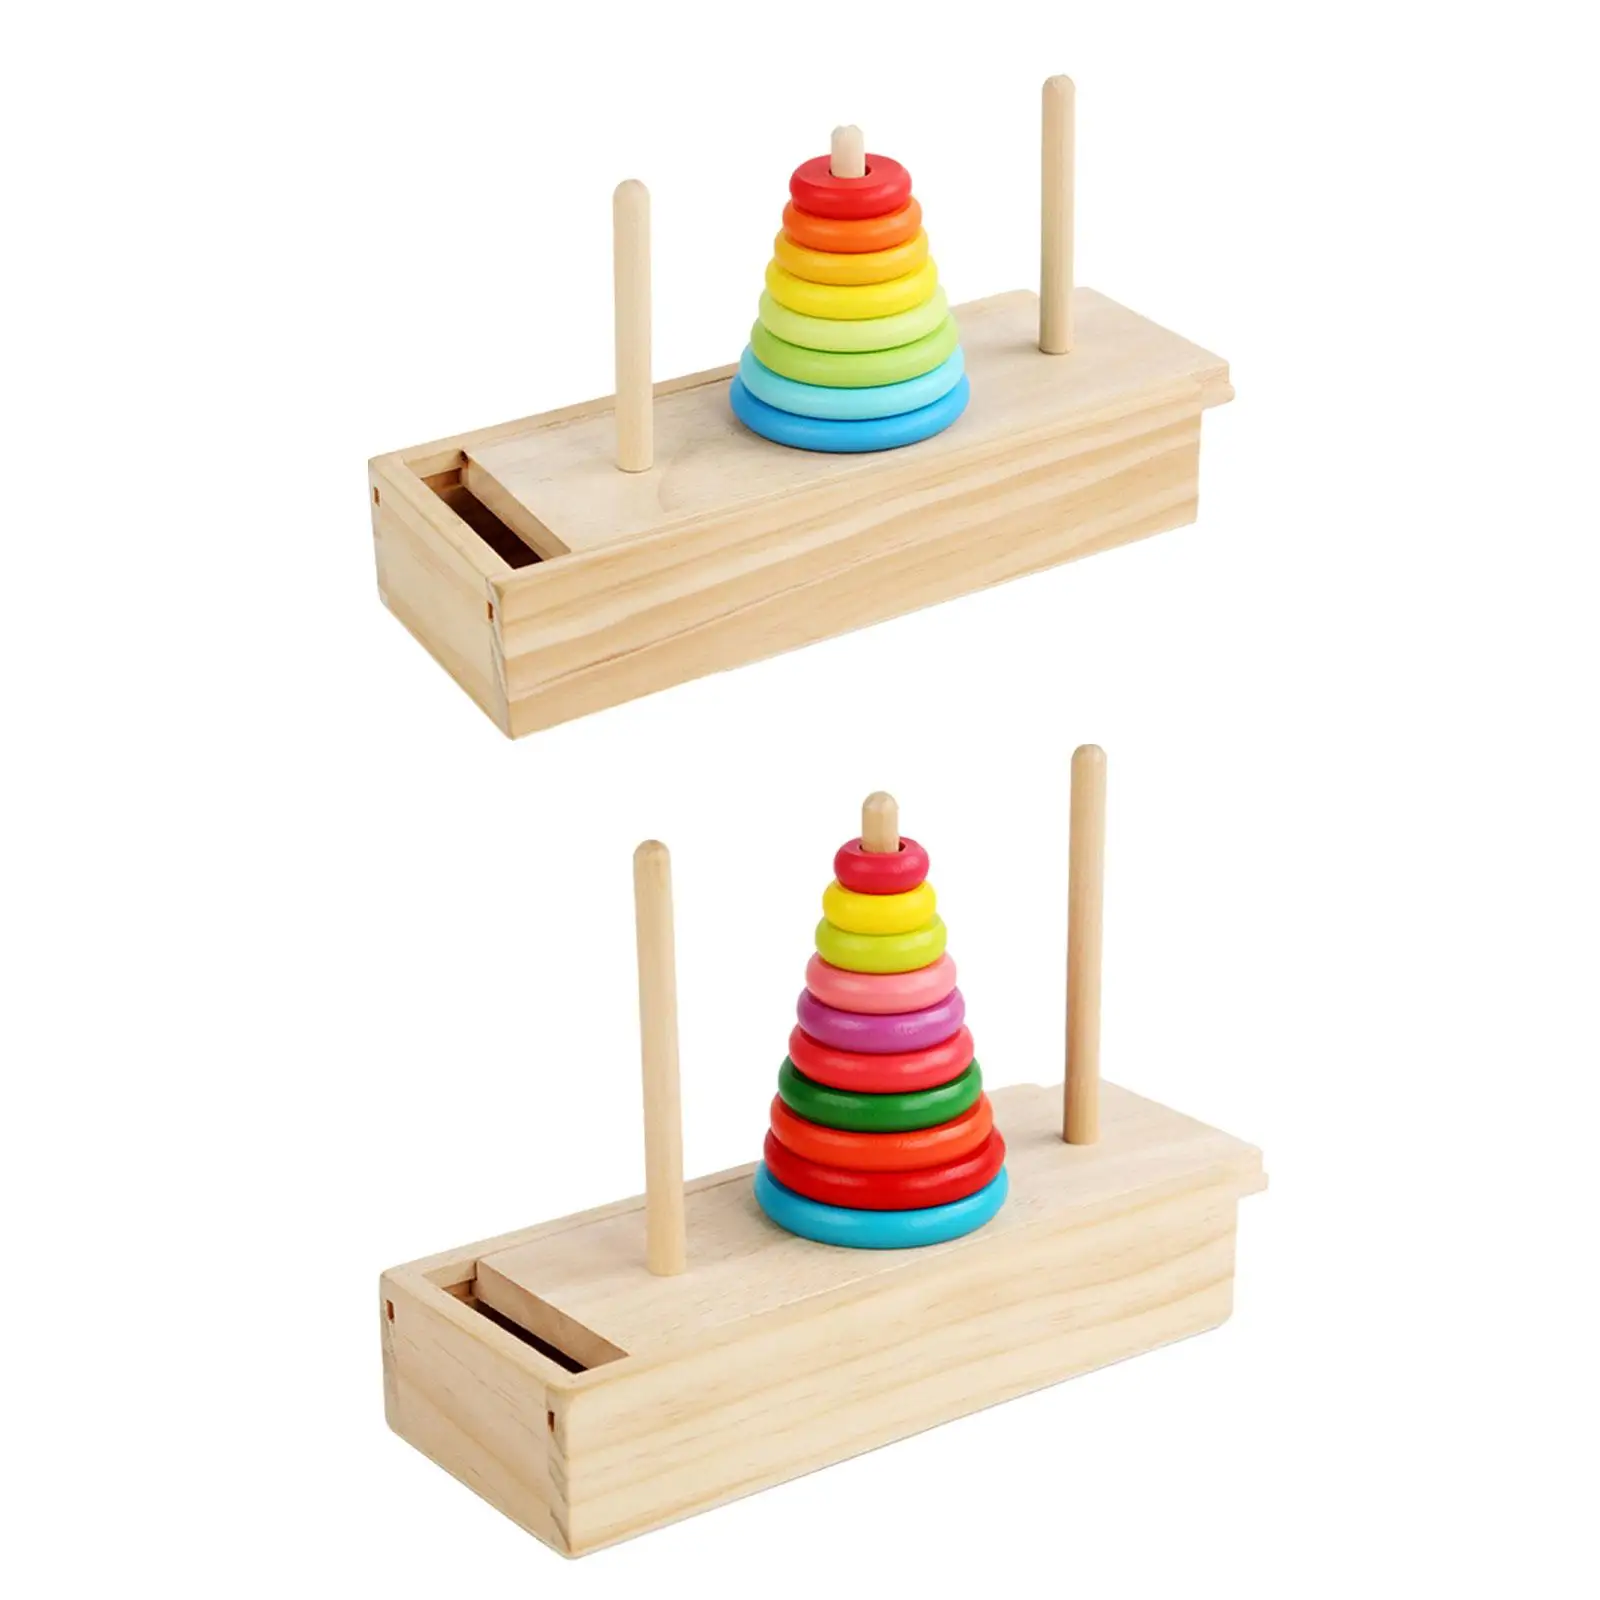 Wood Stacking Tower Stack Sorting Toy Creative Mathematical Game Clearance Toys Practical for Children Baby 3 Year Old and up